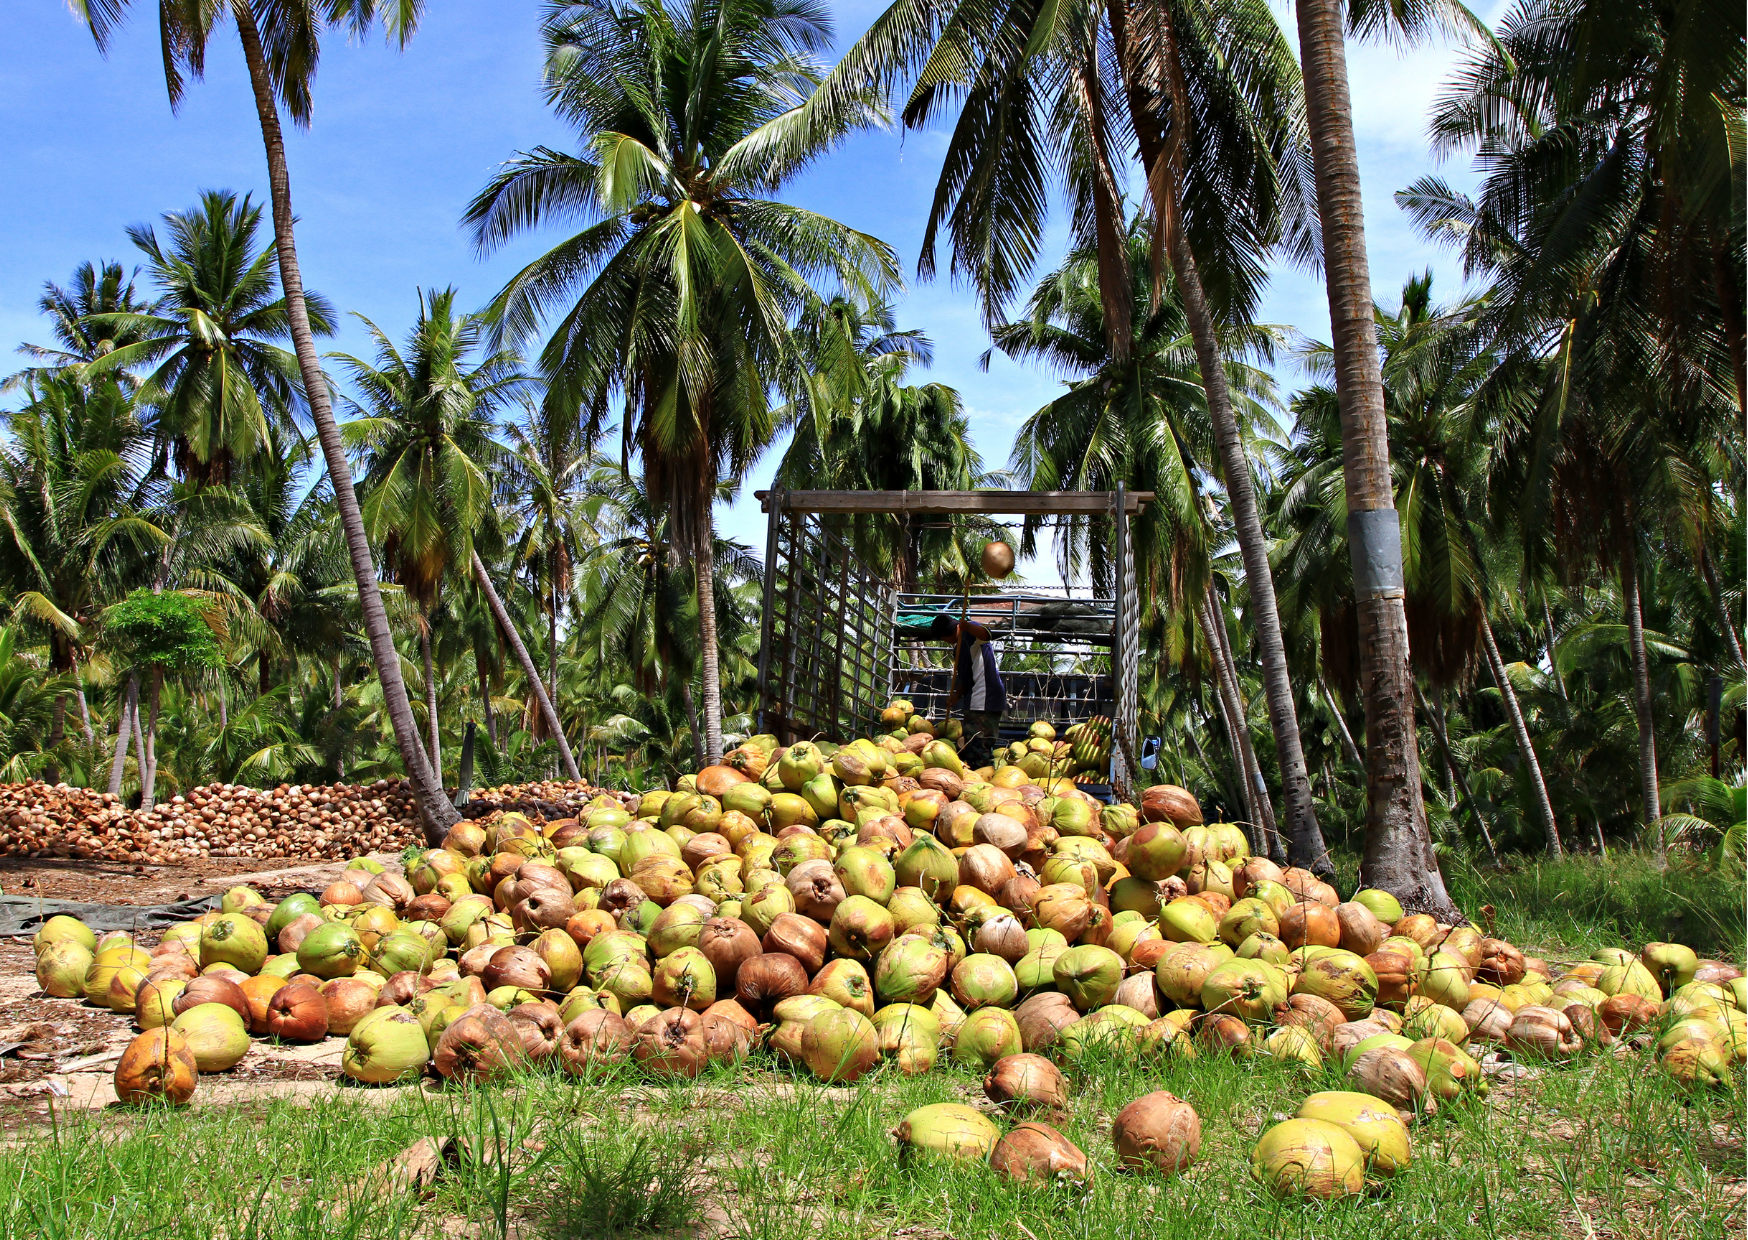 PRRD signs EO 172 tapping P75-B coco levy to modernize, industrialize Phl coconut sector